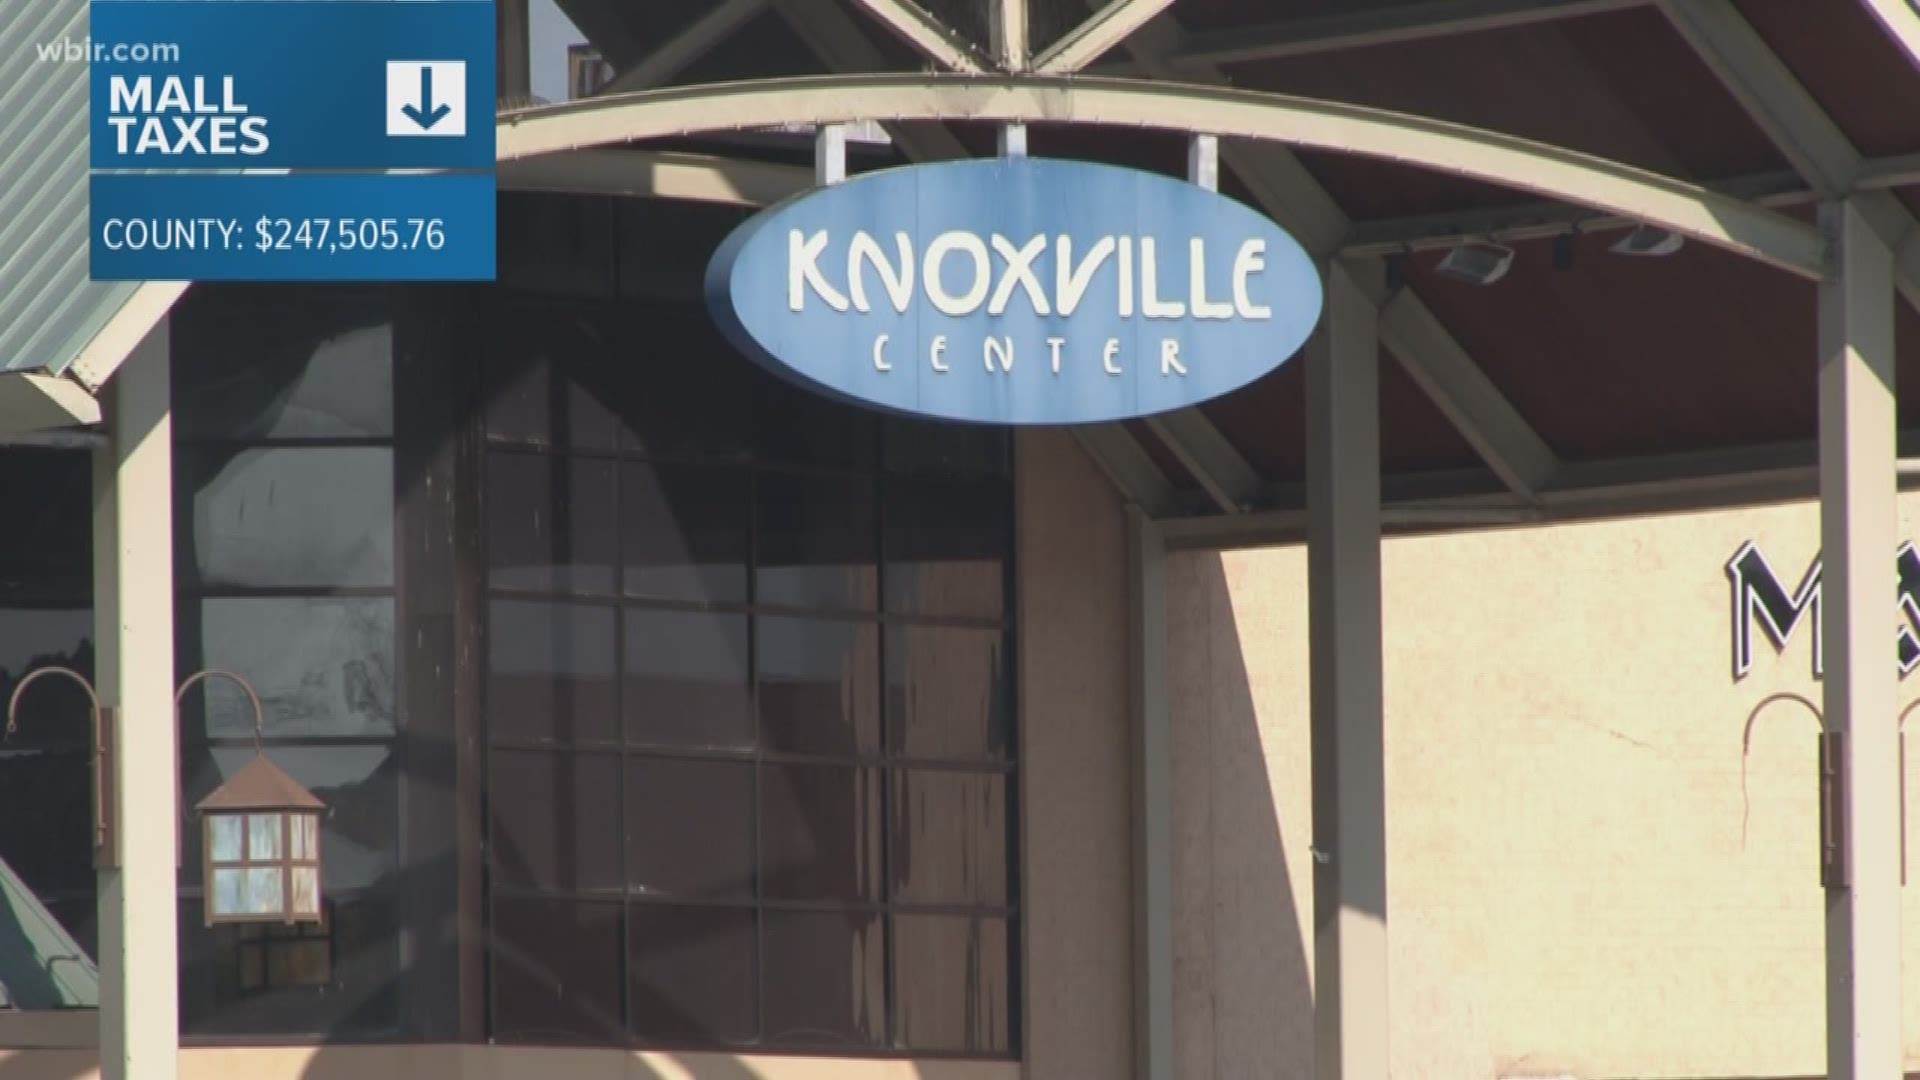 The owners of Knoxville Center Mall have now paid hundreds of thousands of dollars in back taxes.